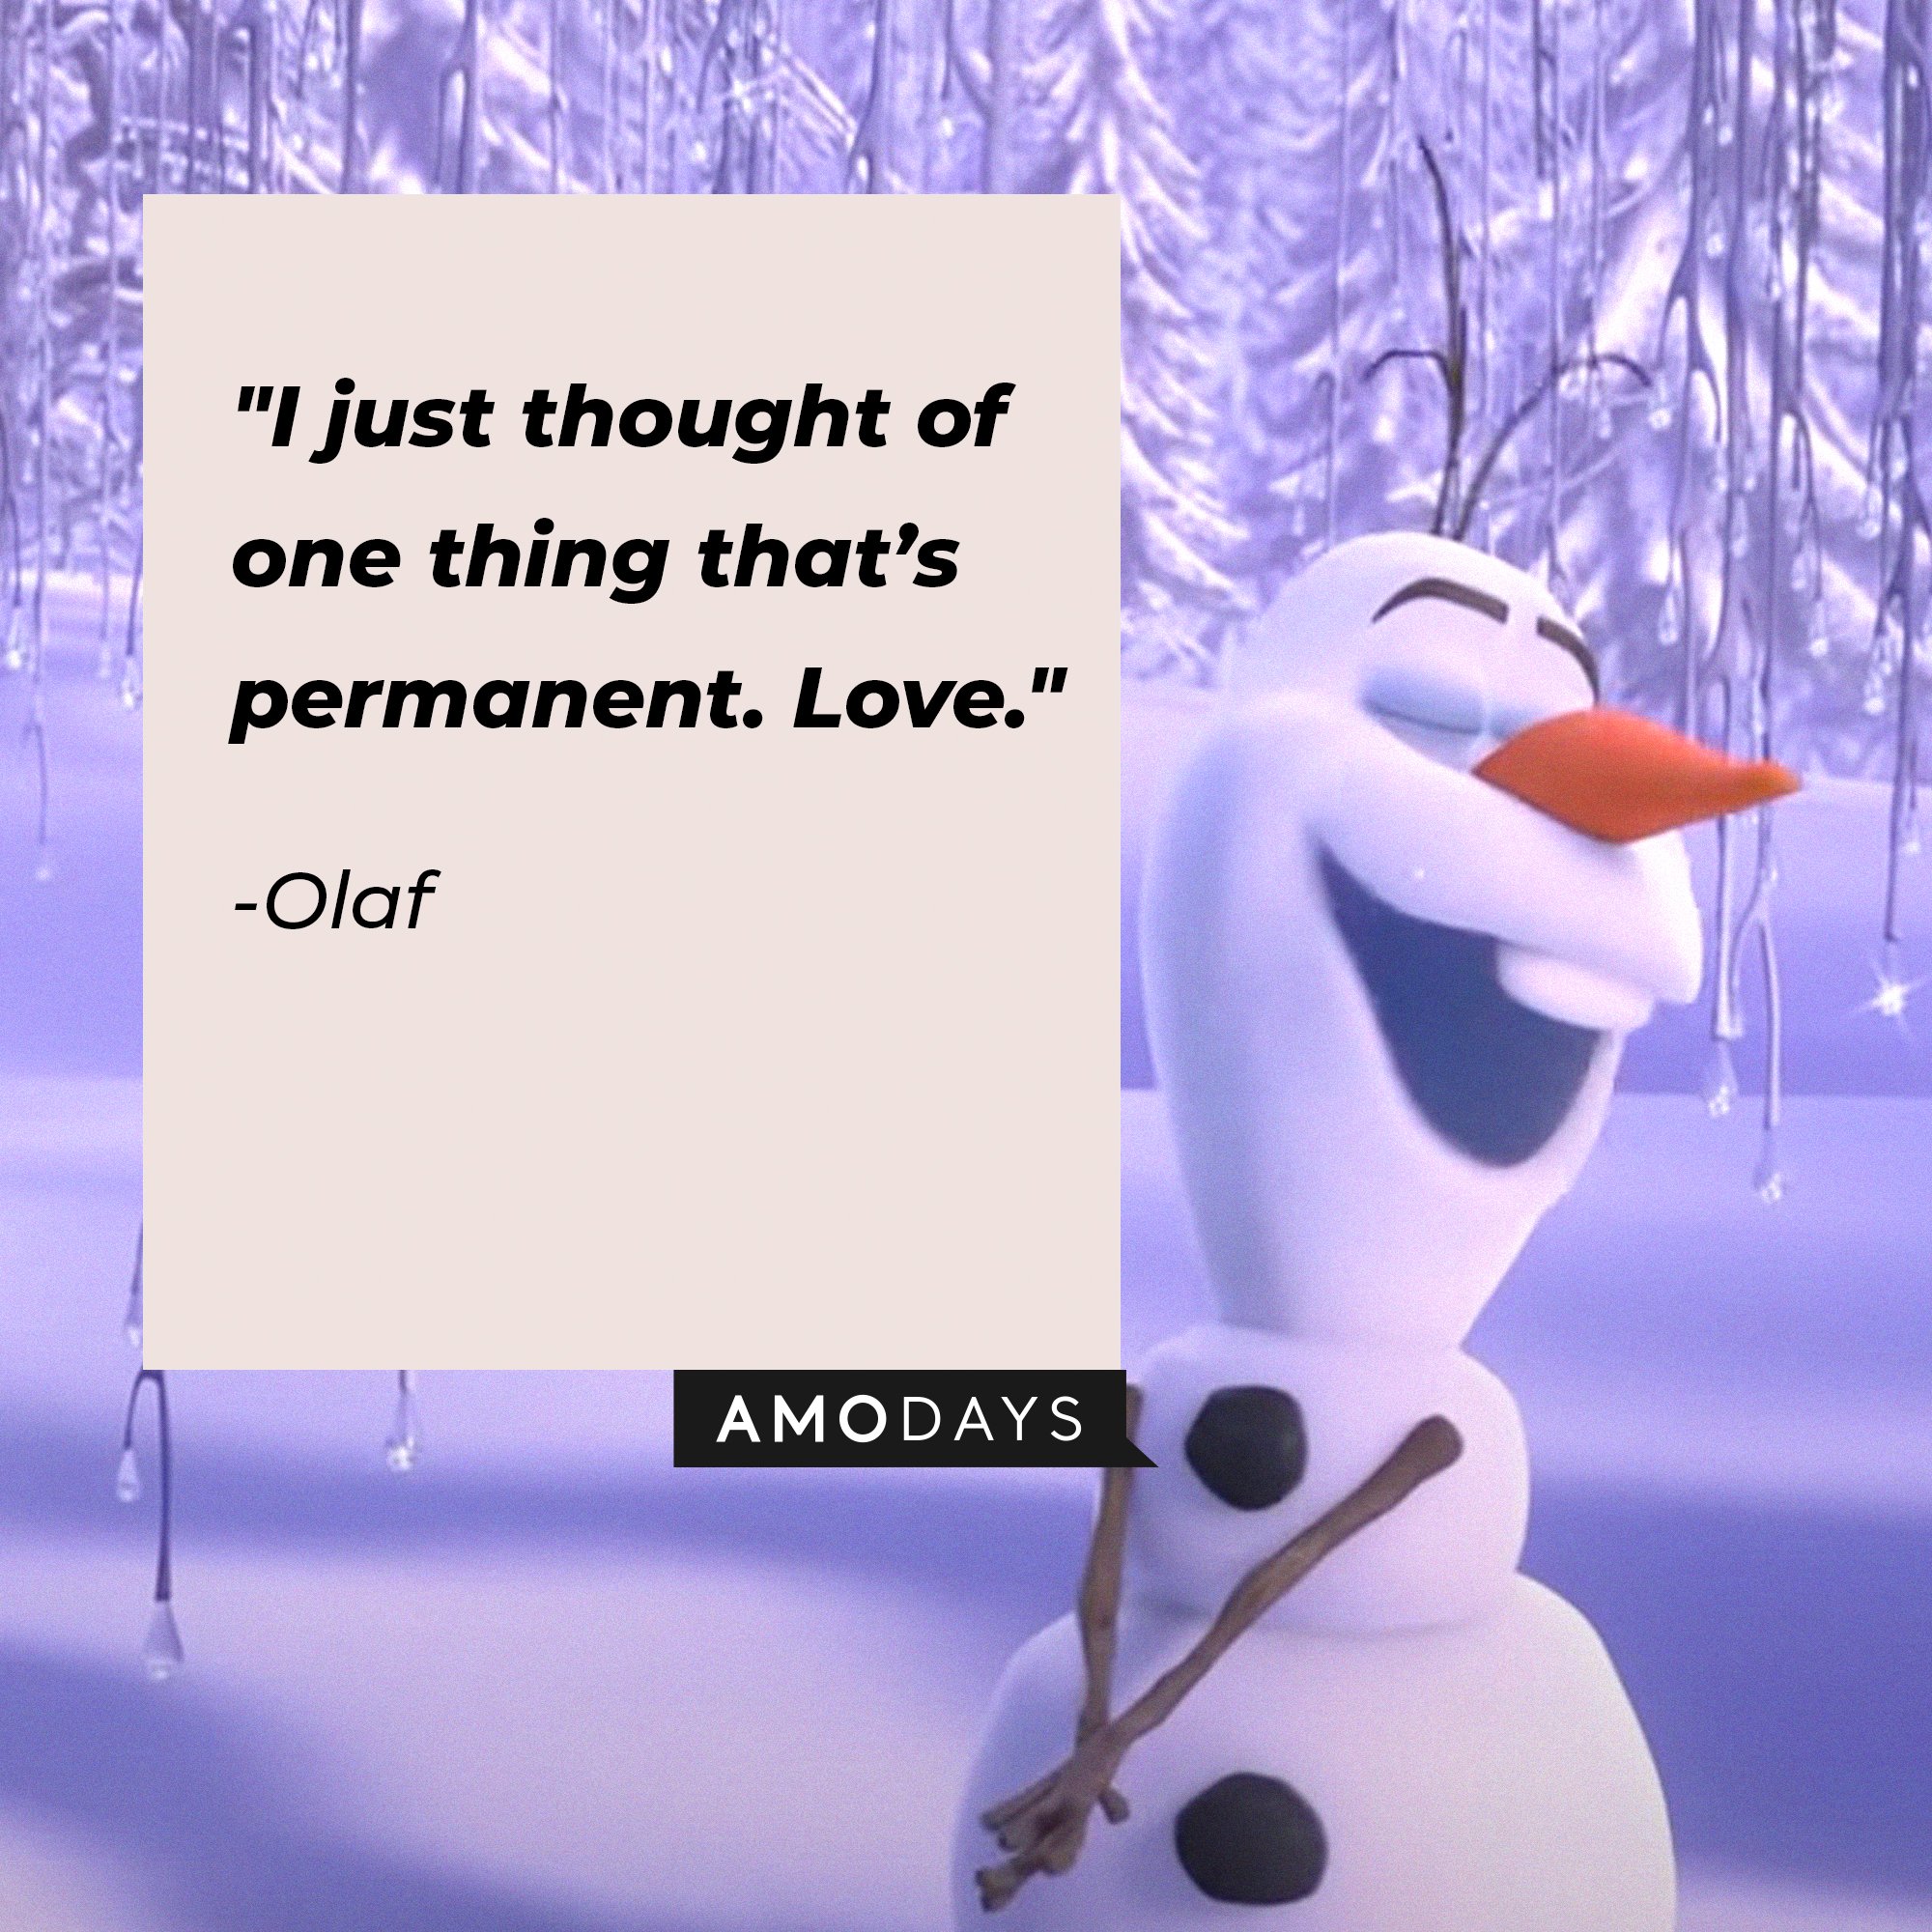 Olaf’s quote: "I just thought of one thing that’s permanent. Love." | Image: AmoDays  